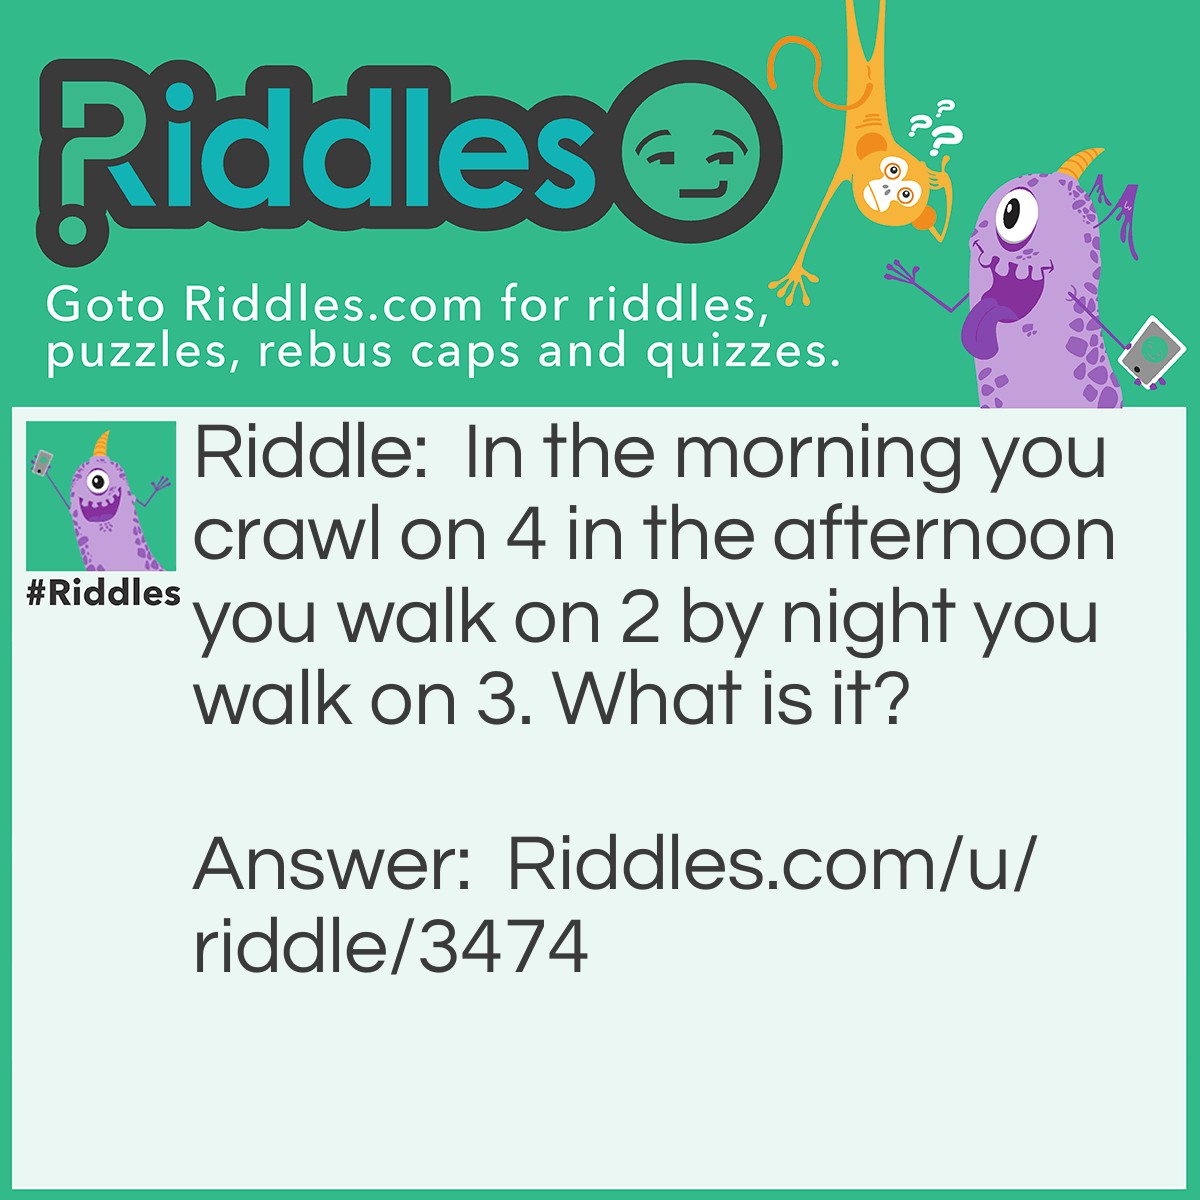 Riddle: In the morning you crawl on 4 in the afternoon you walk on 2 by night you walk on 3. What is it? Answer: A human.